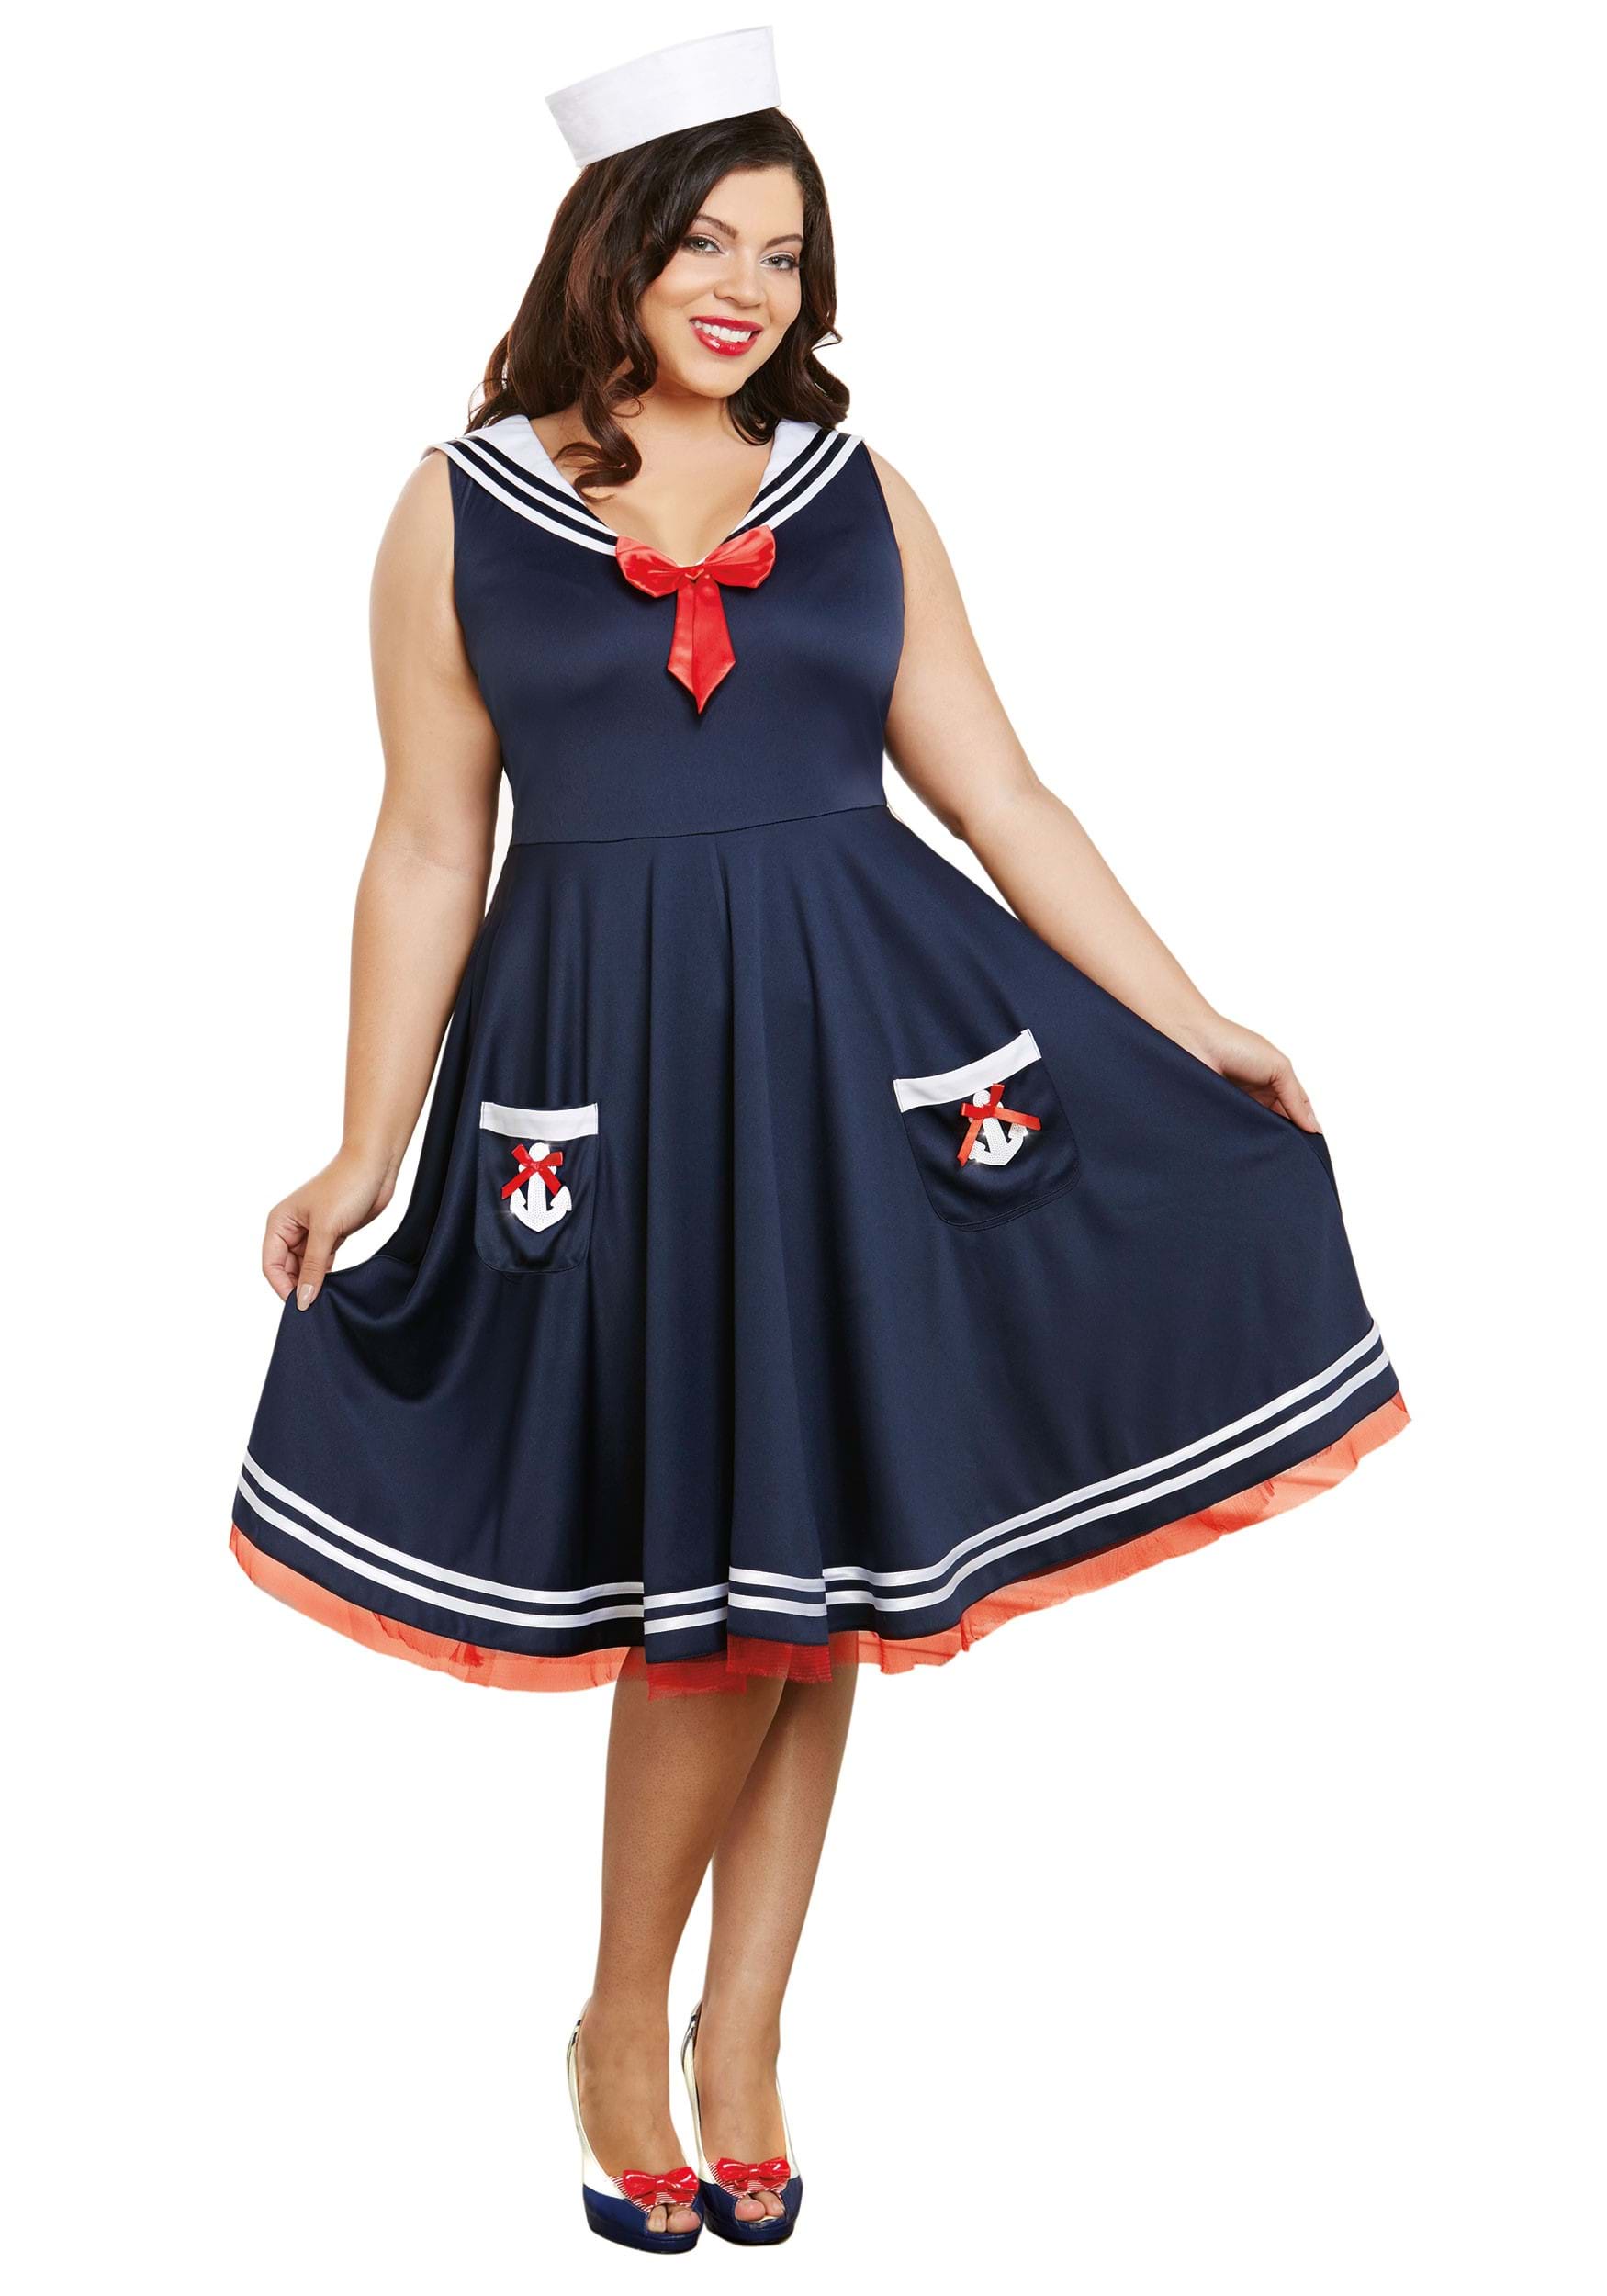 Plus Size All Aboard Costume For Women 8847